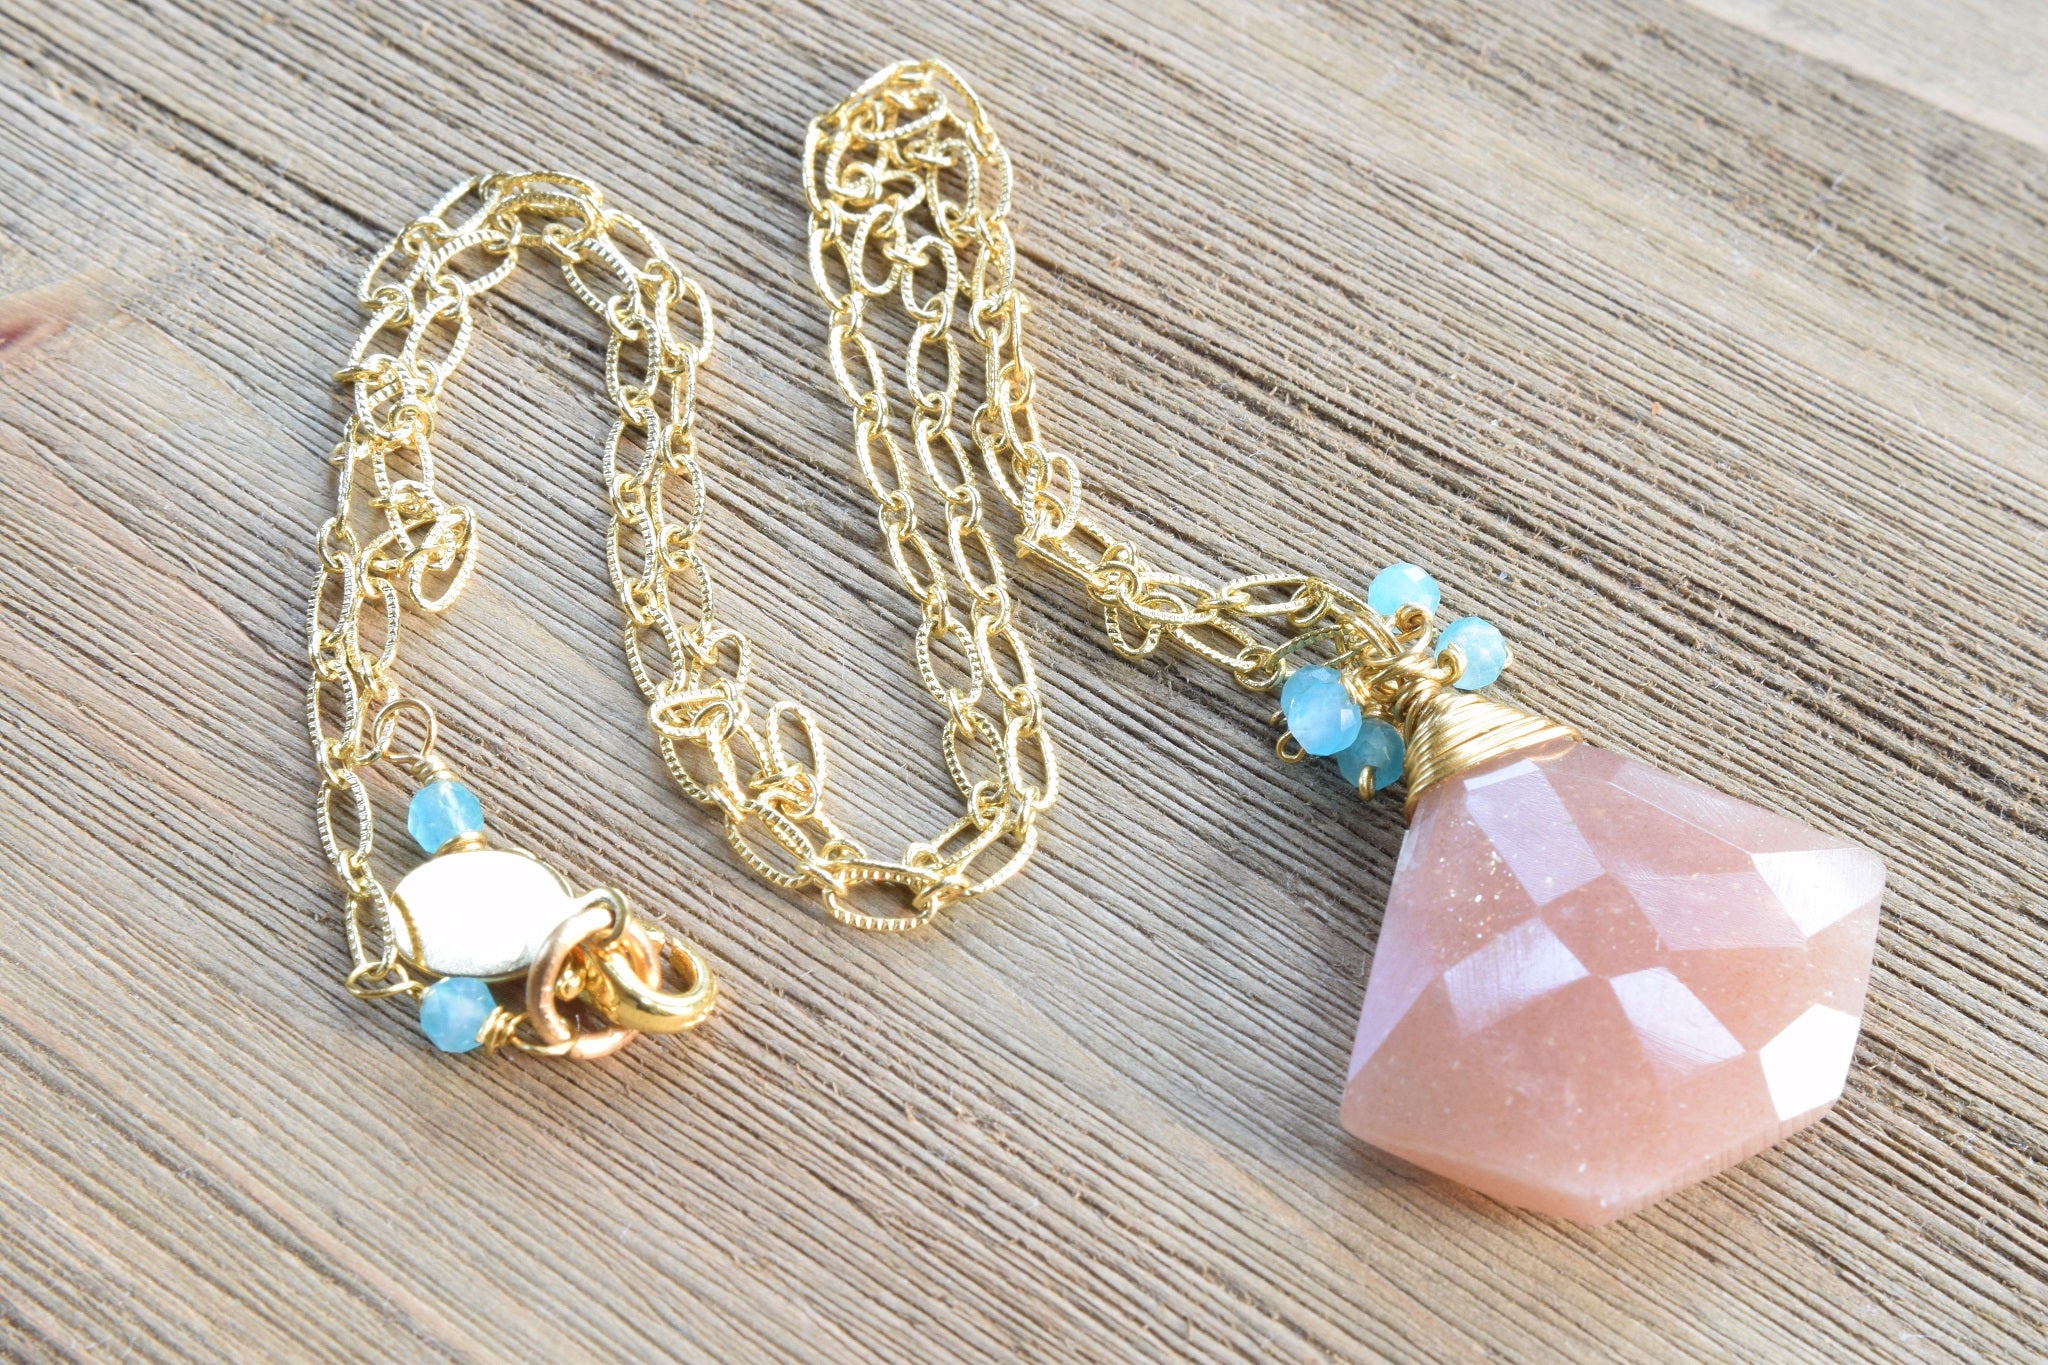 Peach Moonstone Necklace with Gold Filled Trigger Clasp – Beads of Paradise